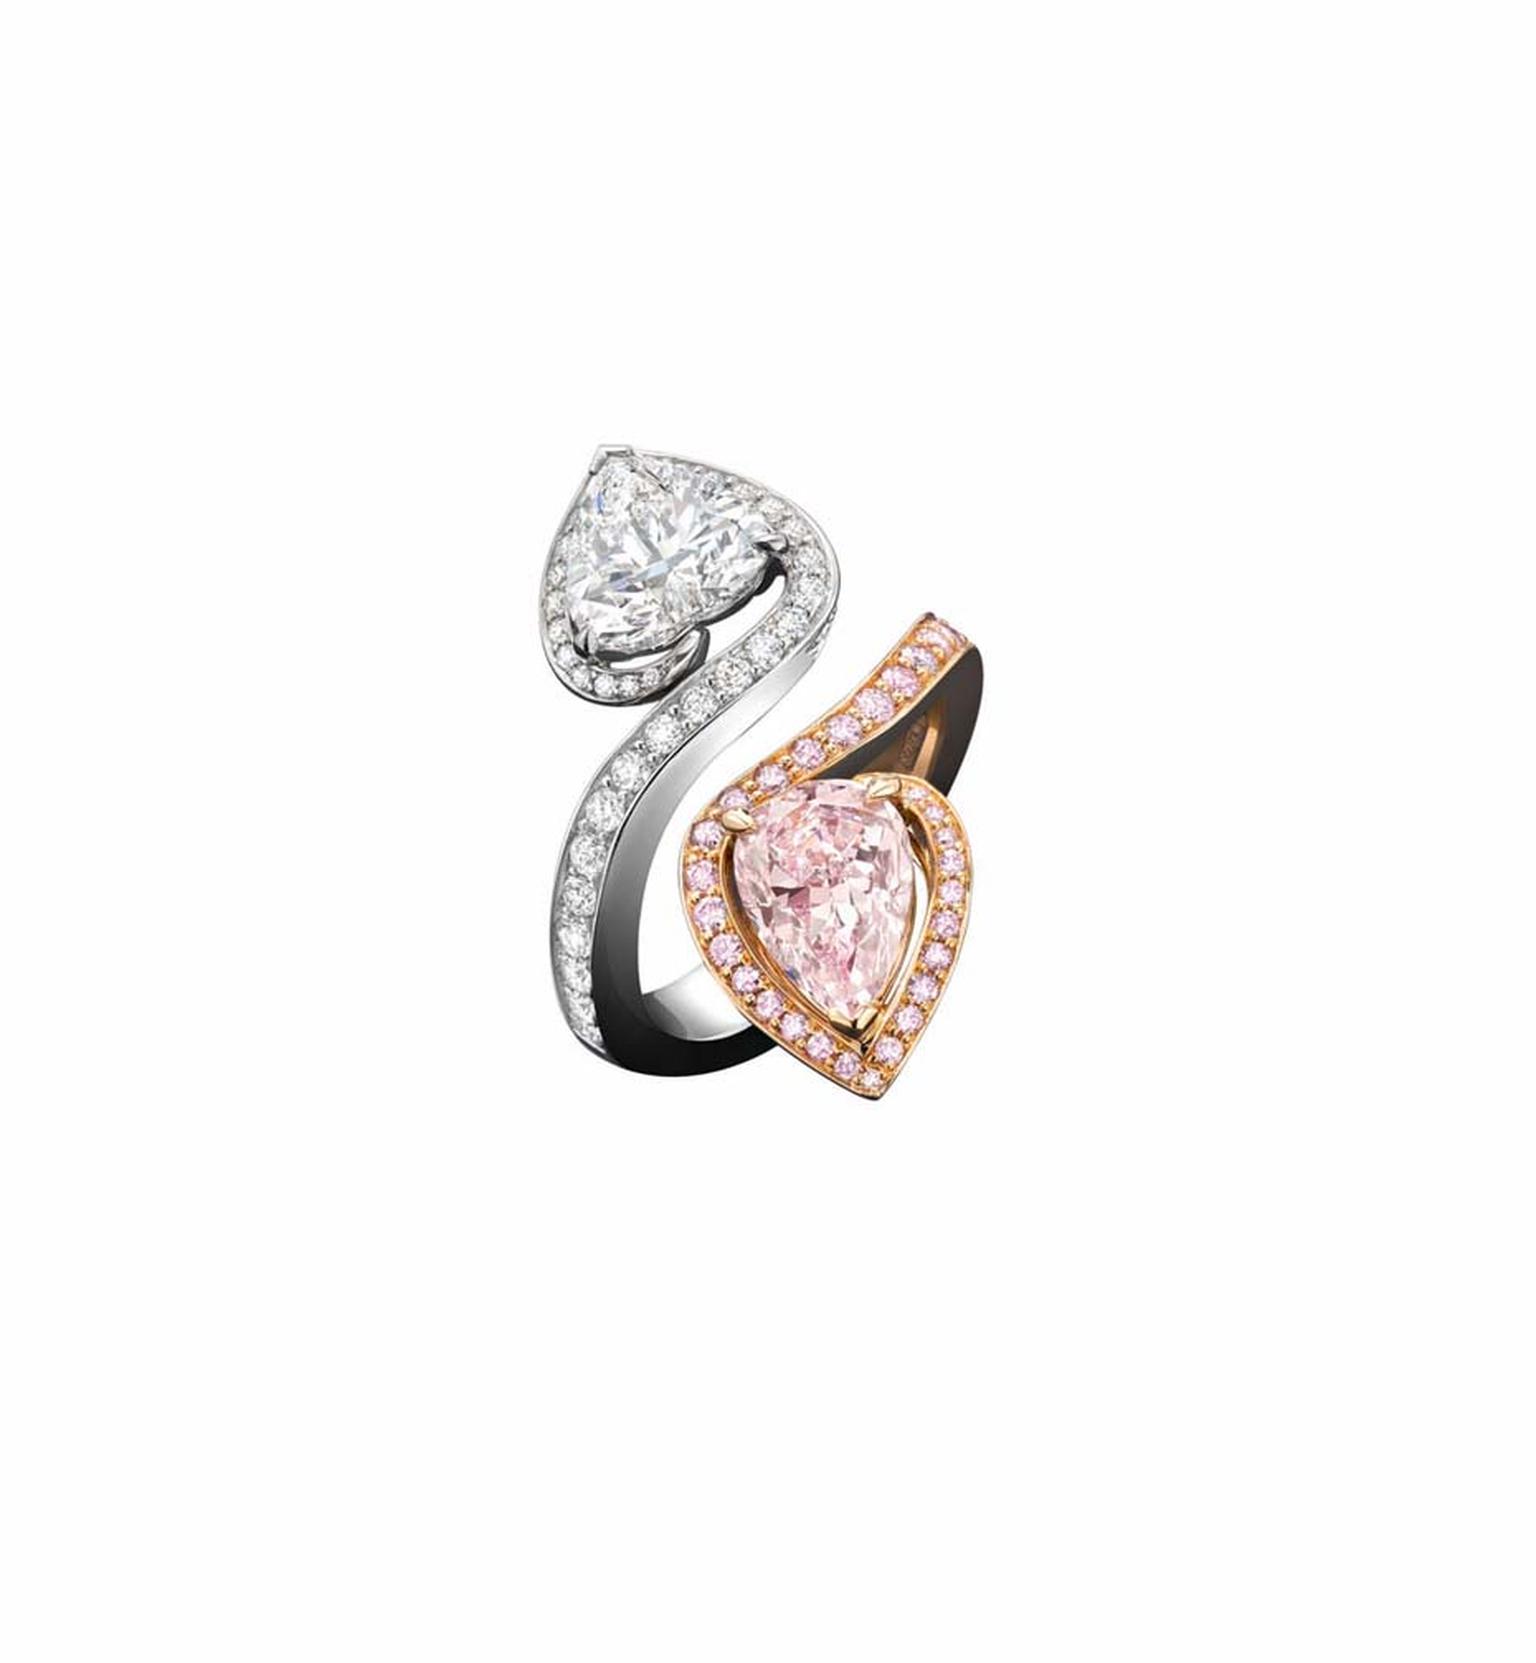 Boodles Gemini collection pink and white diamond heart-shaped ring set in white and pink gold.